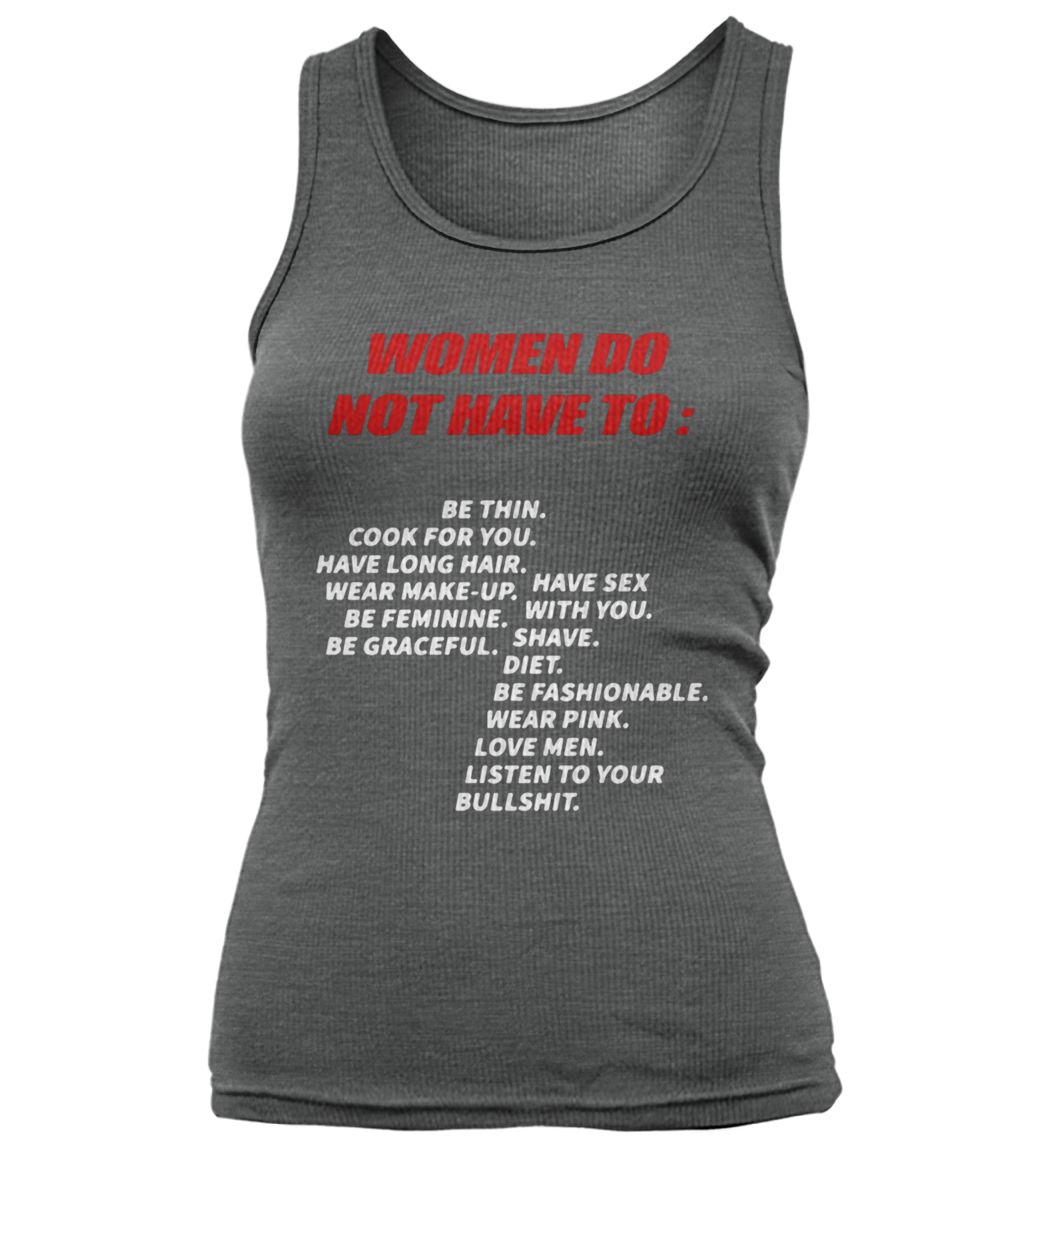 Women do not have to be thin cook for you listen to your bullshit women's tank top